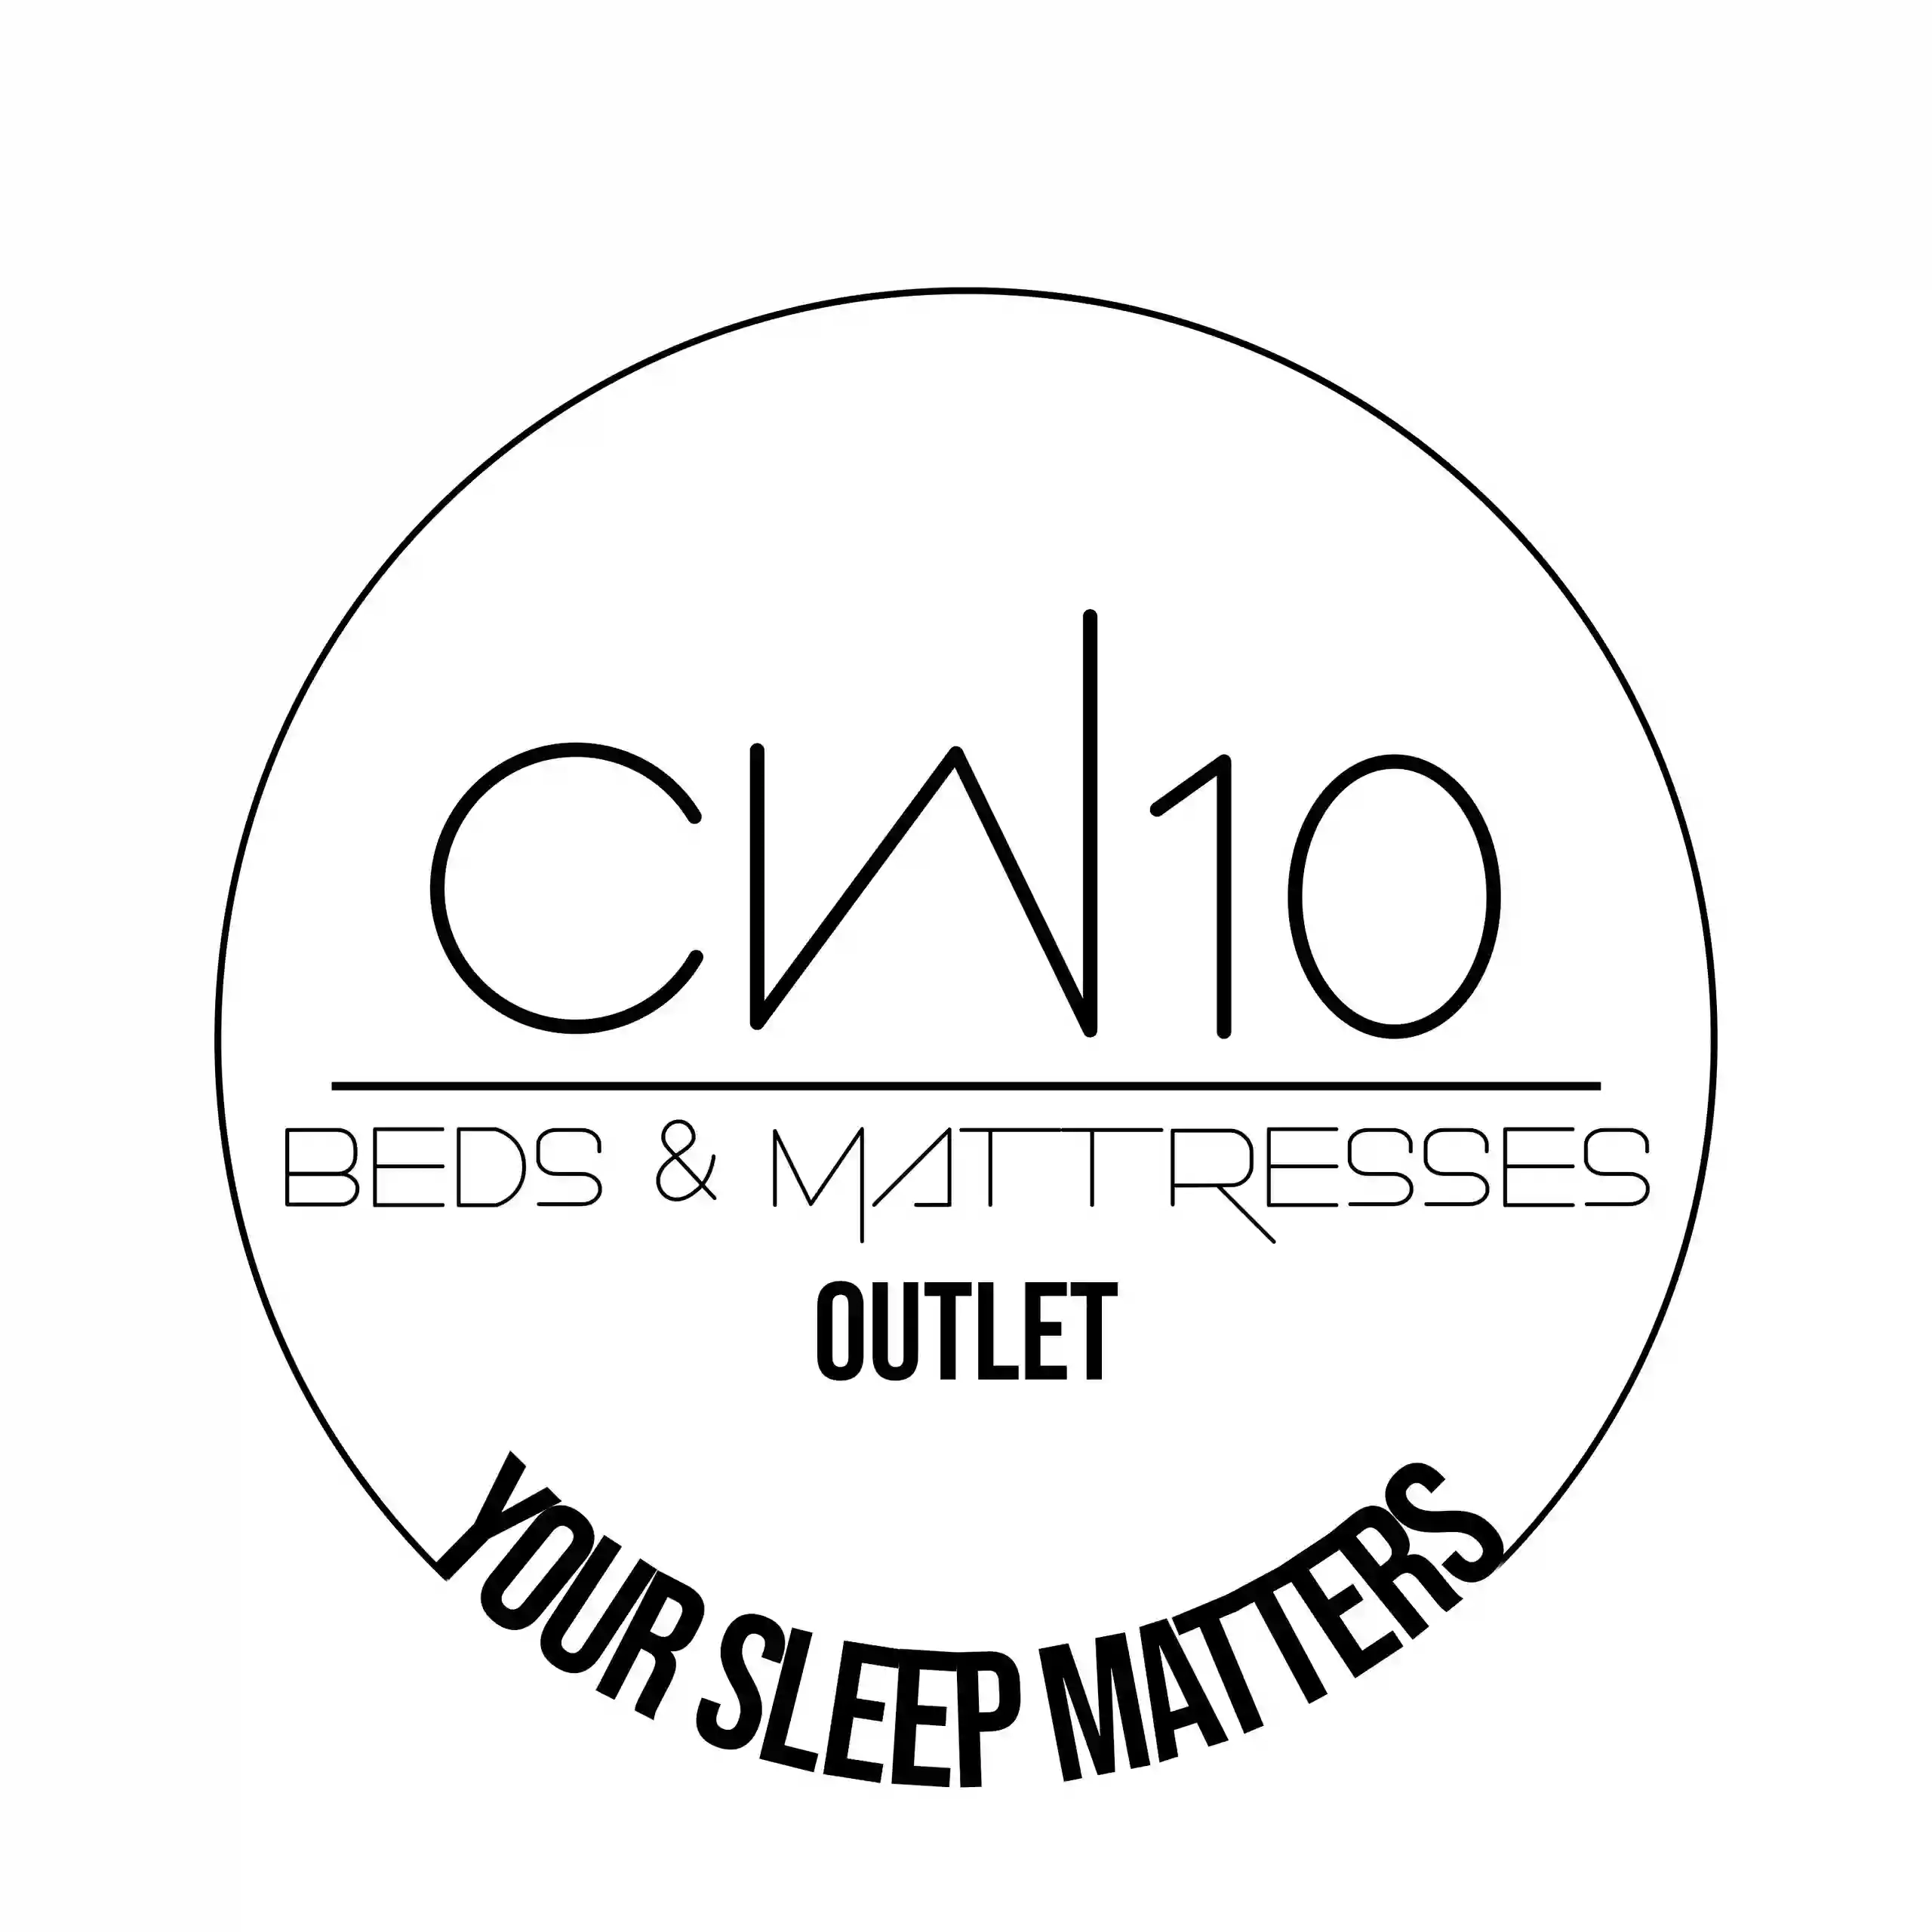 CW10 Beds & Mattresses Outlet